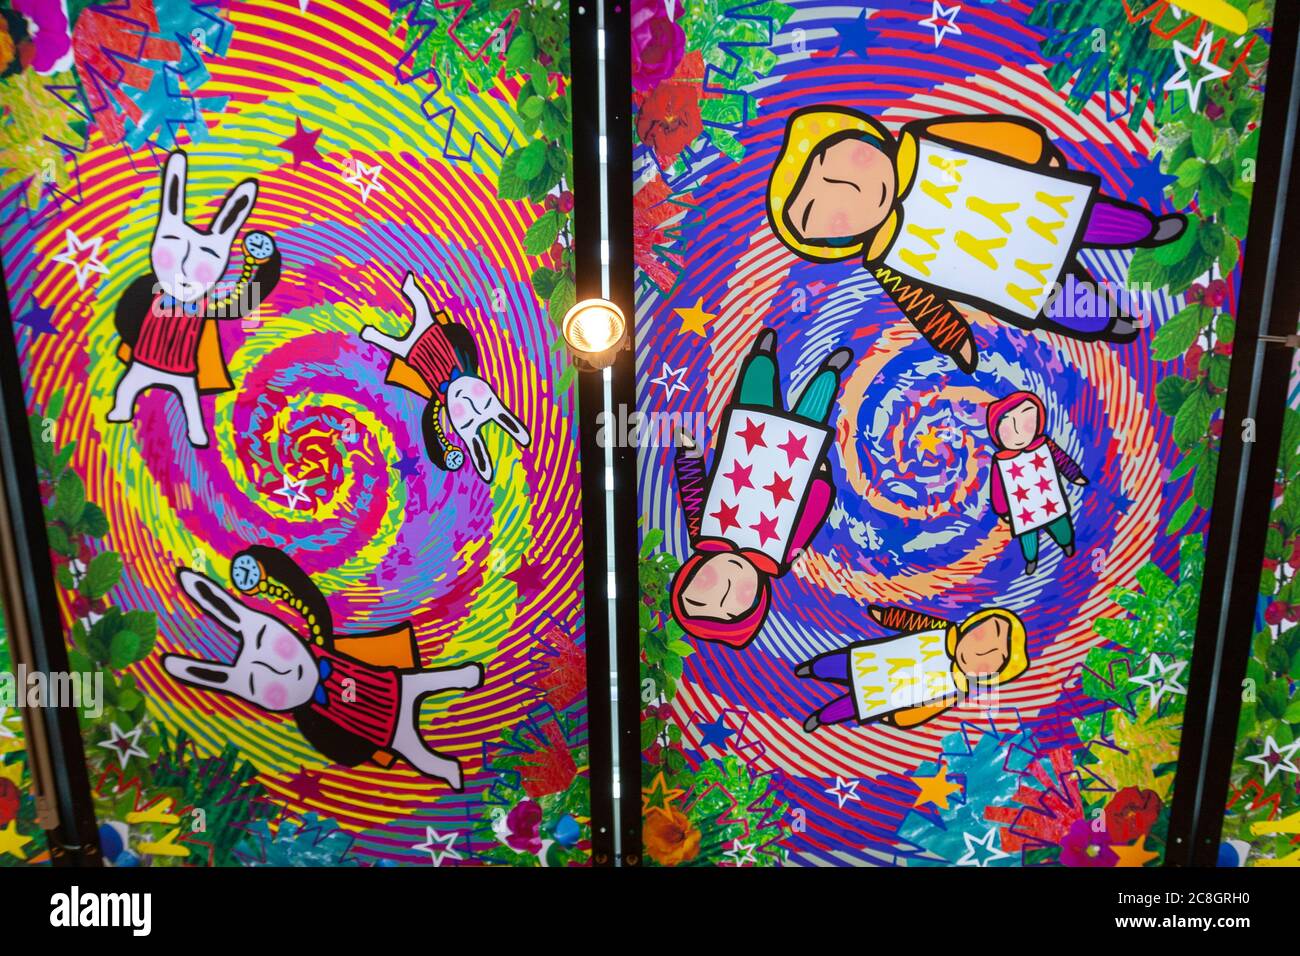 Colourful painting in Insa-dong, about 100 galleries  Insadong-gil, Jongno-gu, Seoul, South Korea Stock Photo